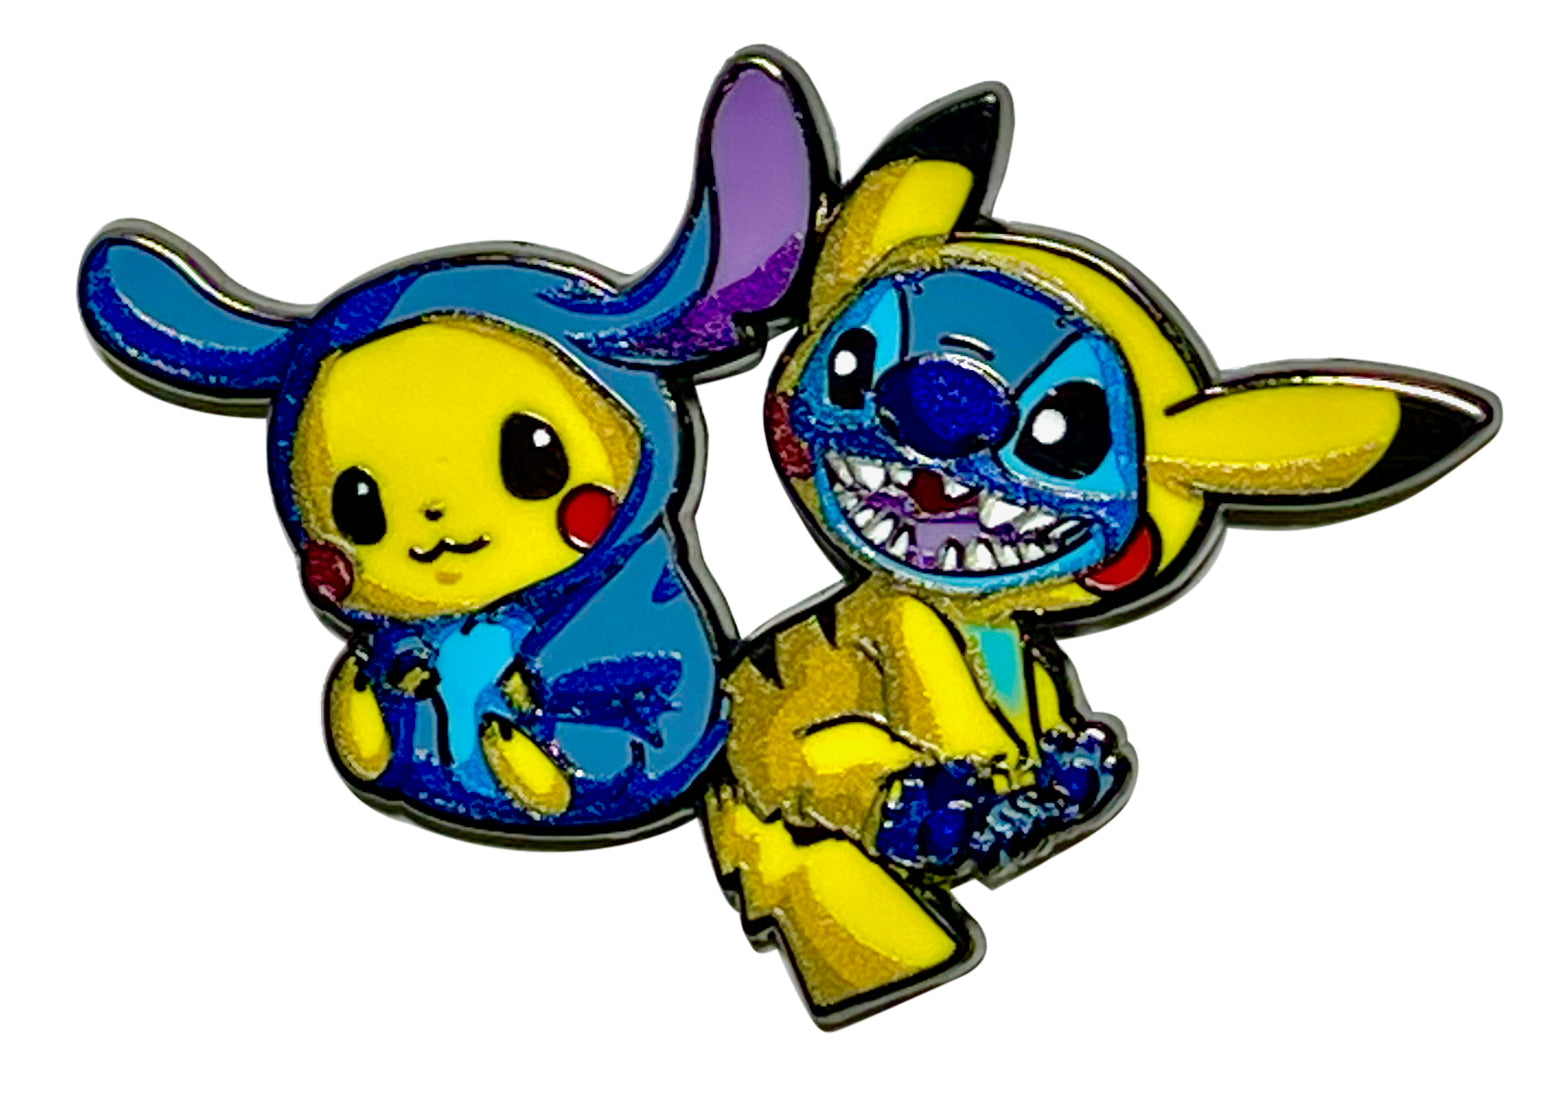 Stitch Change Clothes Pin - Enamel Pins - Ideal For Collections, Pinning To Your Favorite Hat, Or Displaying On Your Backpack, Purse Or Clothing Items